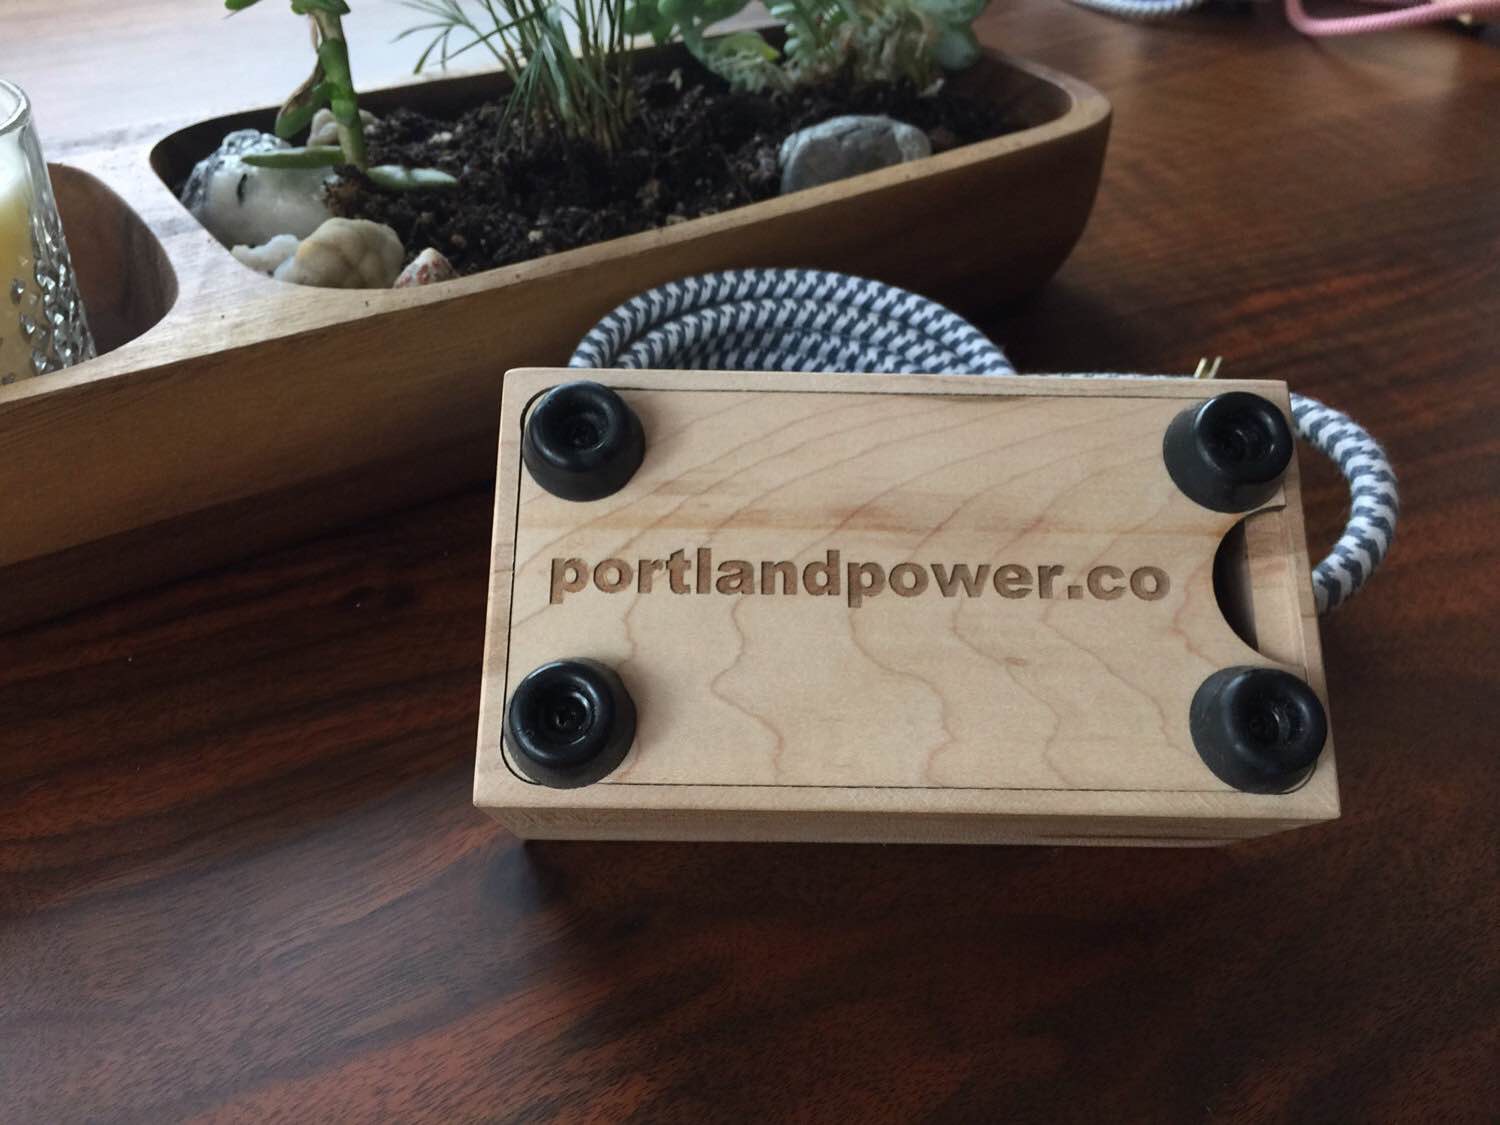 portland-power-co-wooden-charging-stations-3